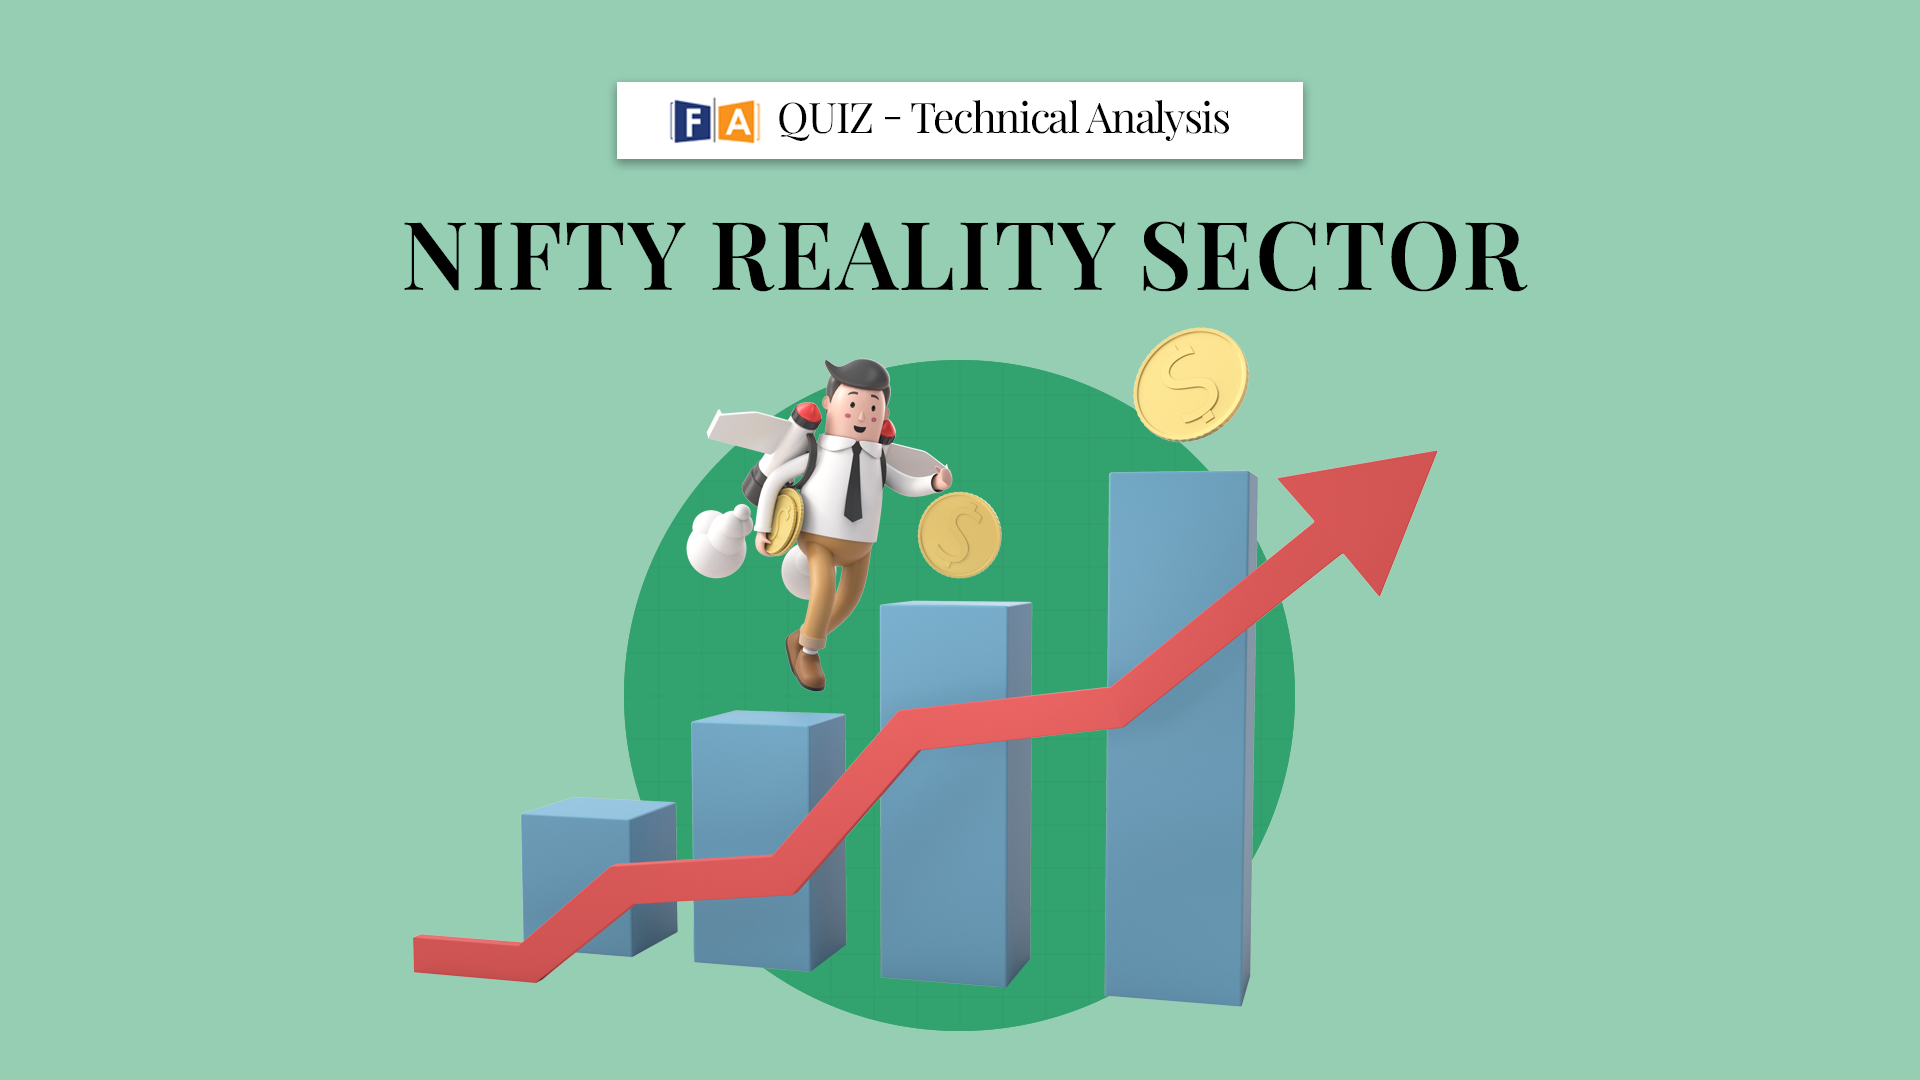 NIfty Reality Quiz Image FinLearn Academy